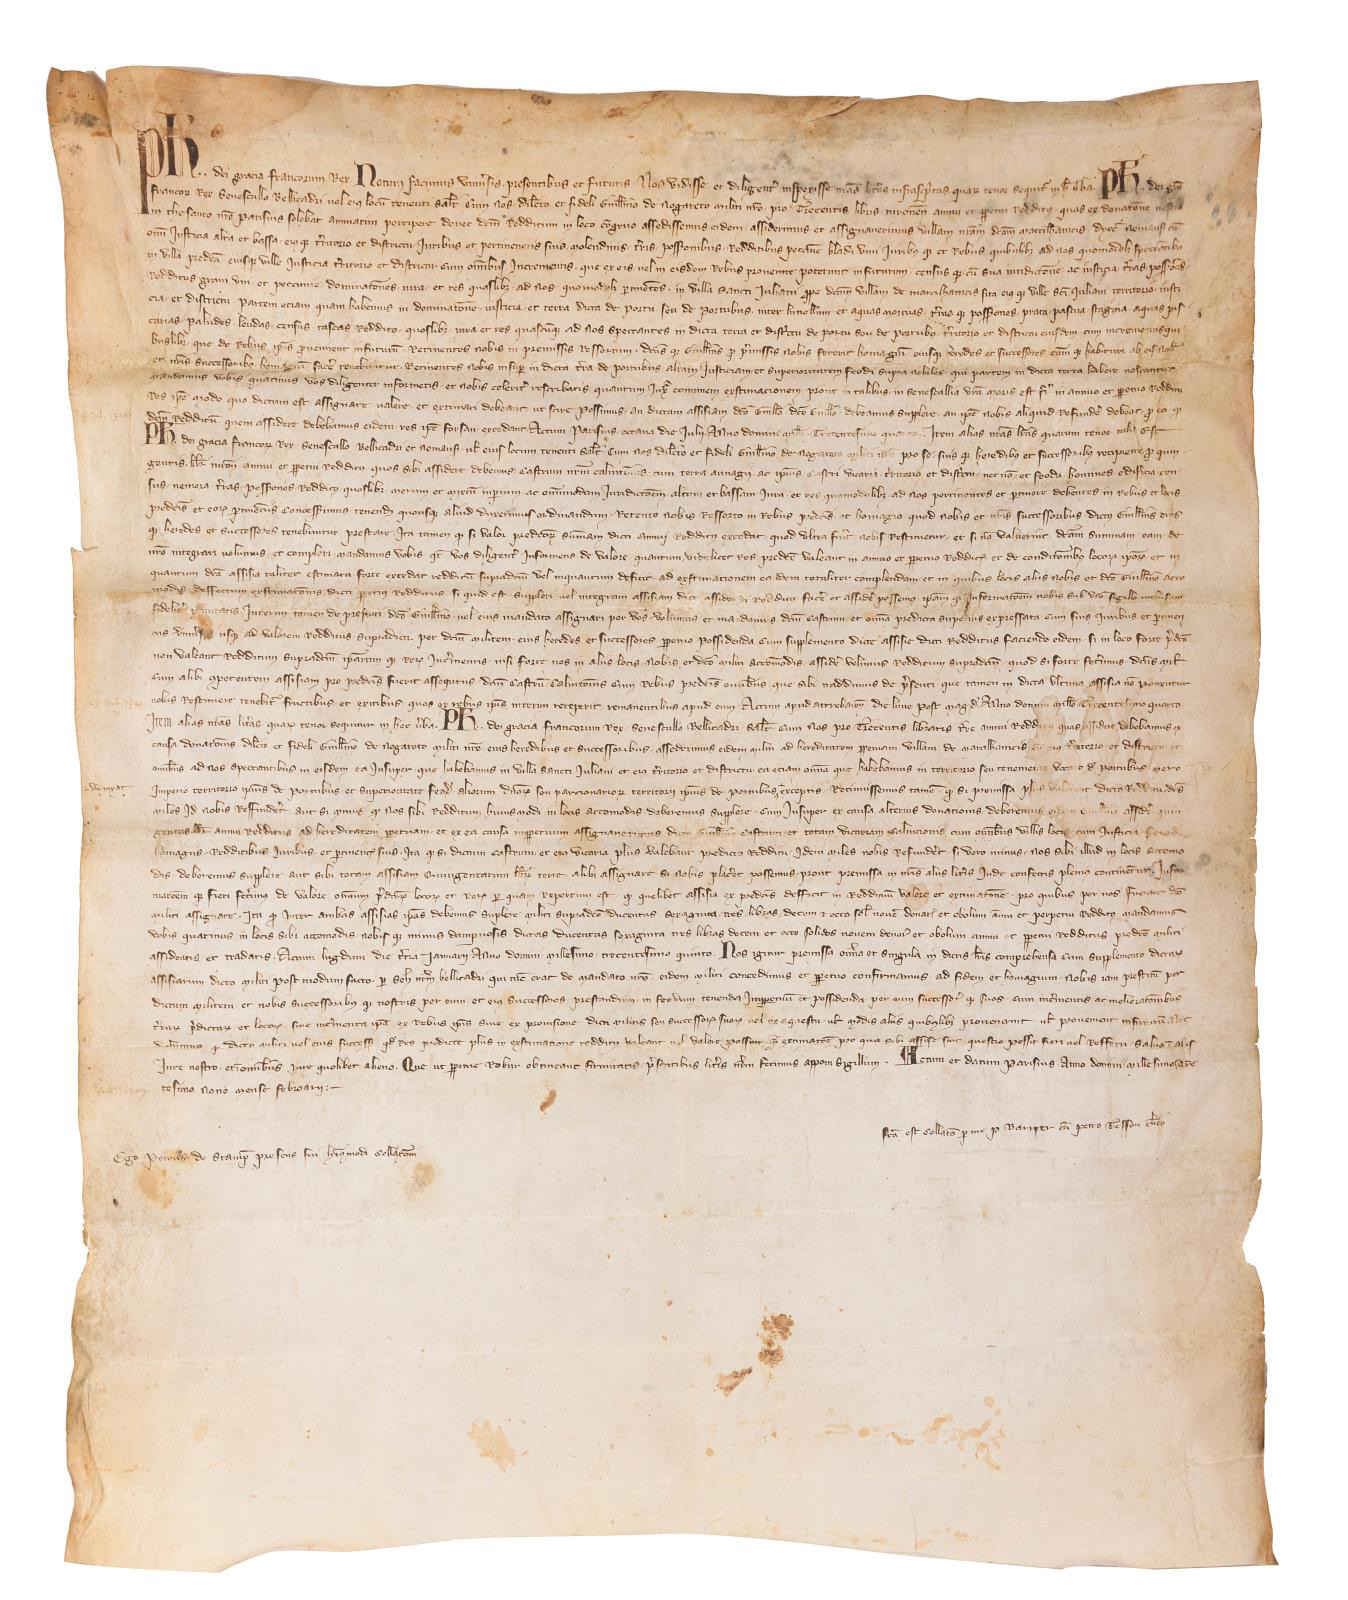 An Autograph Manuscript by Philip the Fair: A Piece of French History